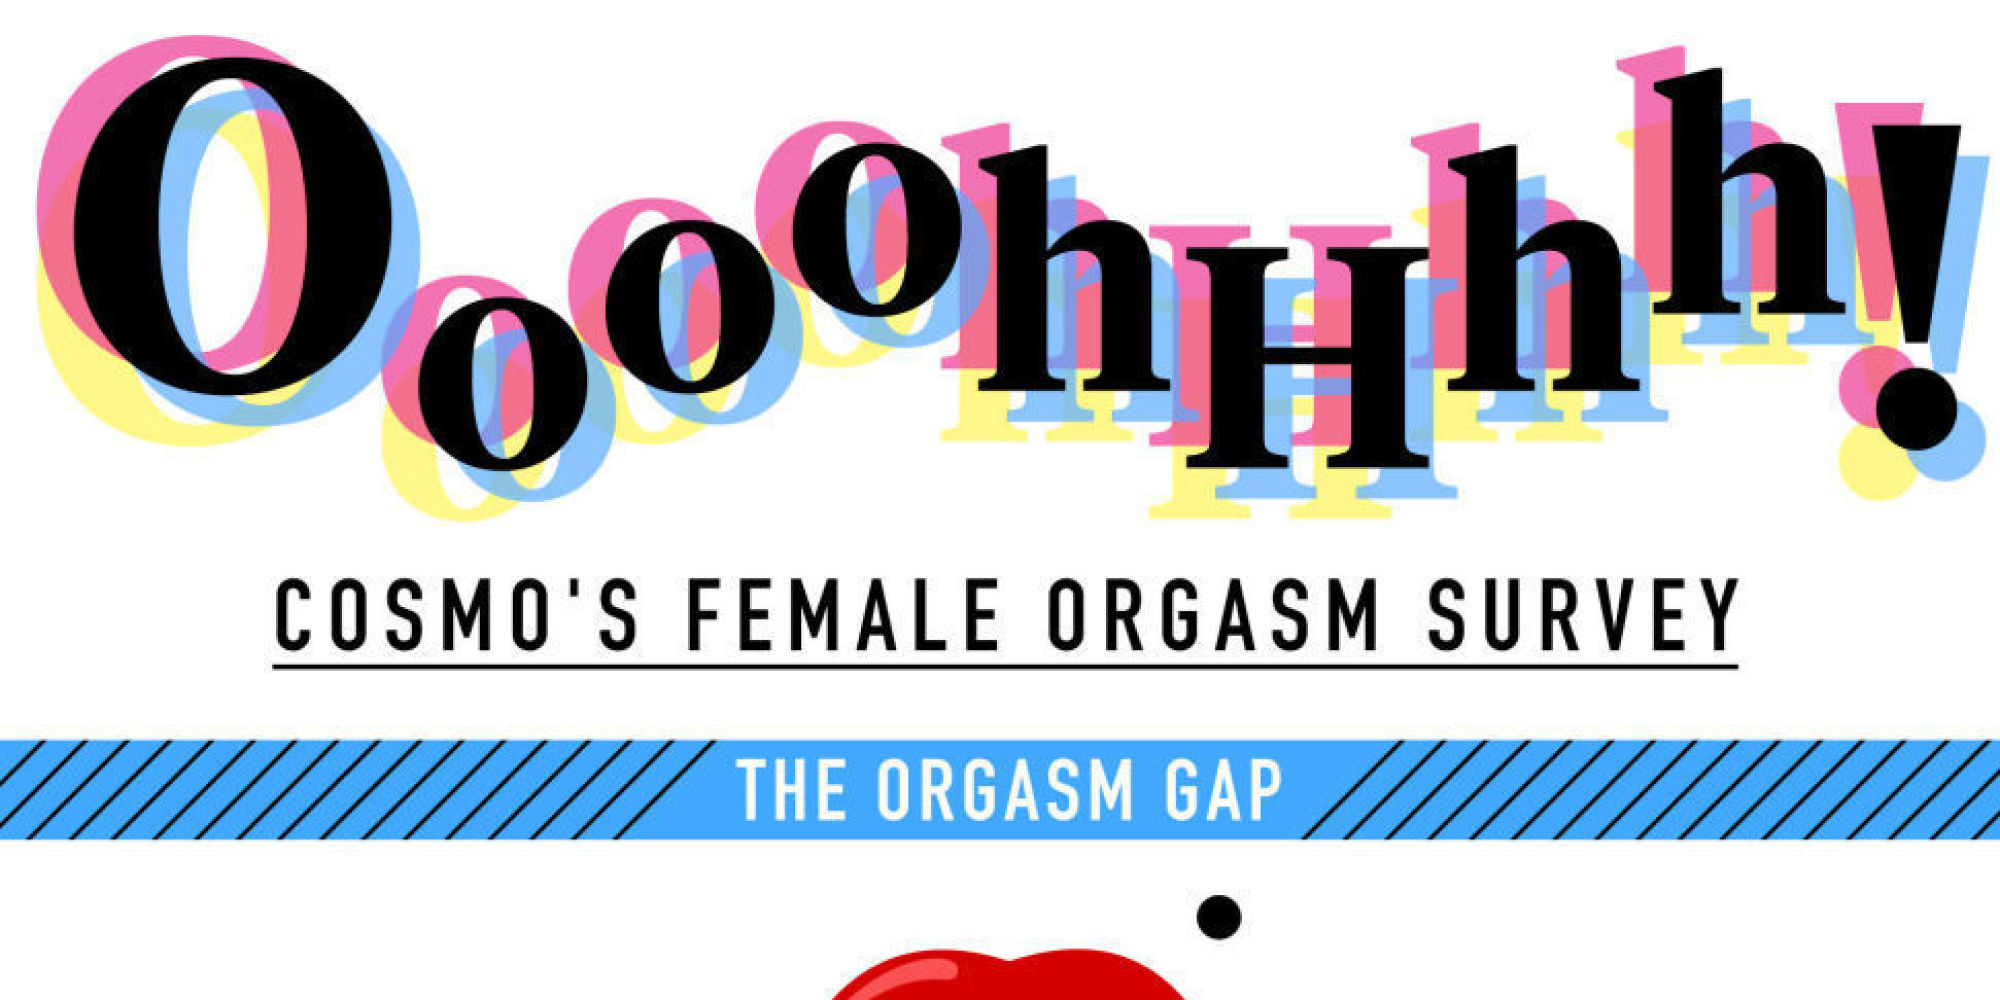 Cosmos Female Orgasm Survey Tells You Everything You Need To Know